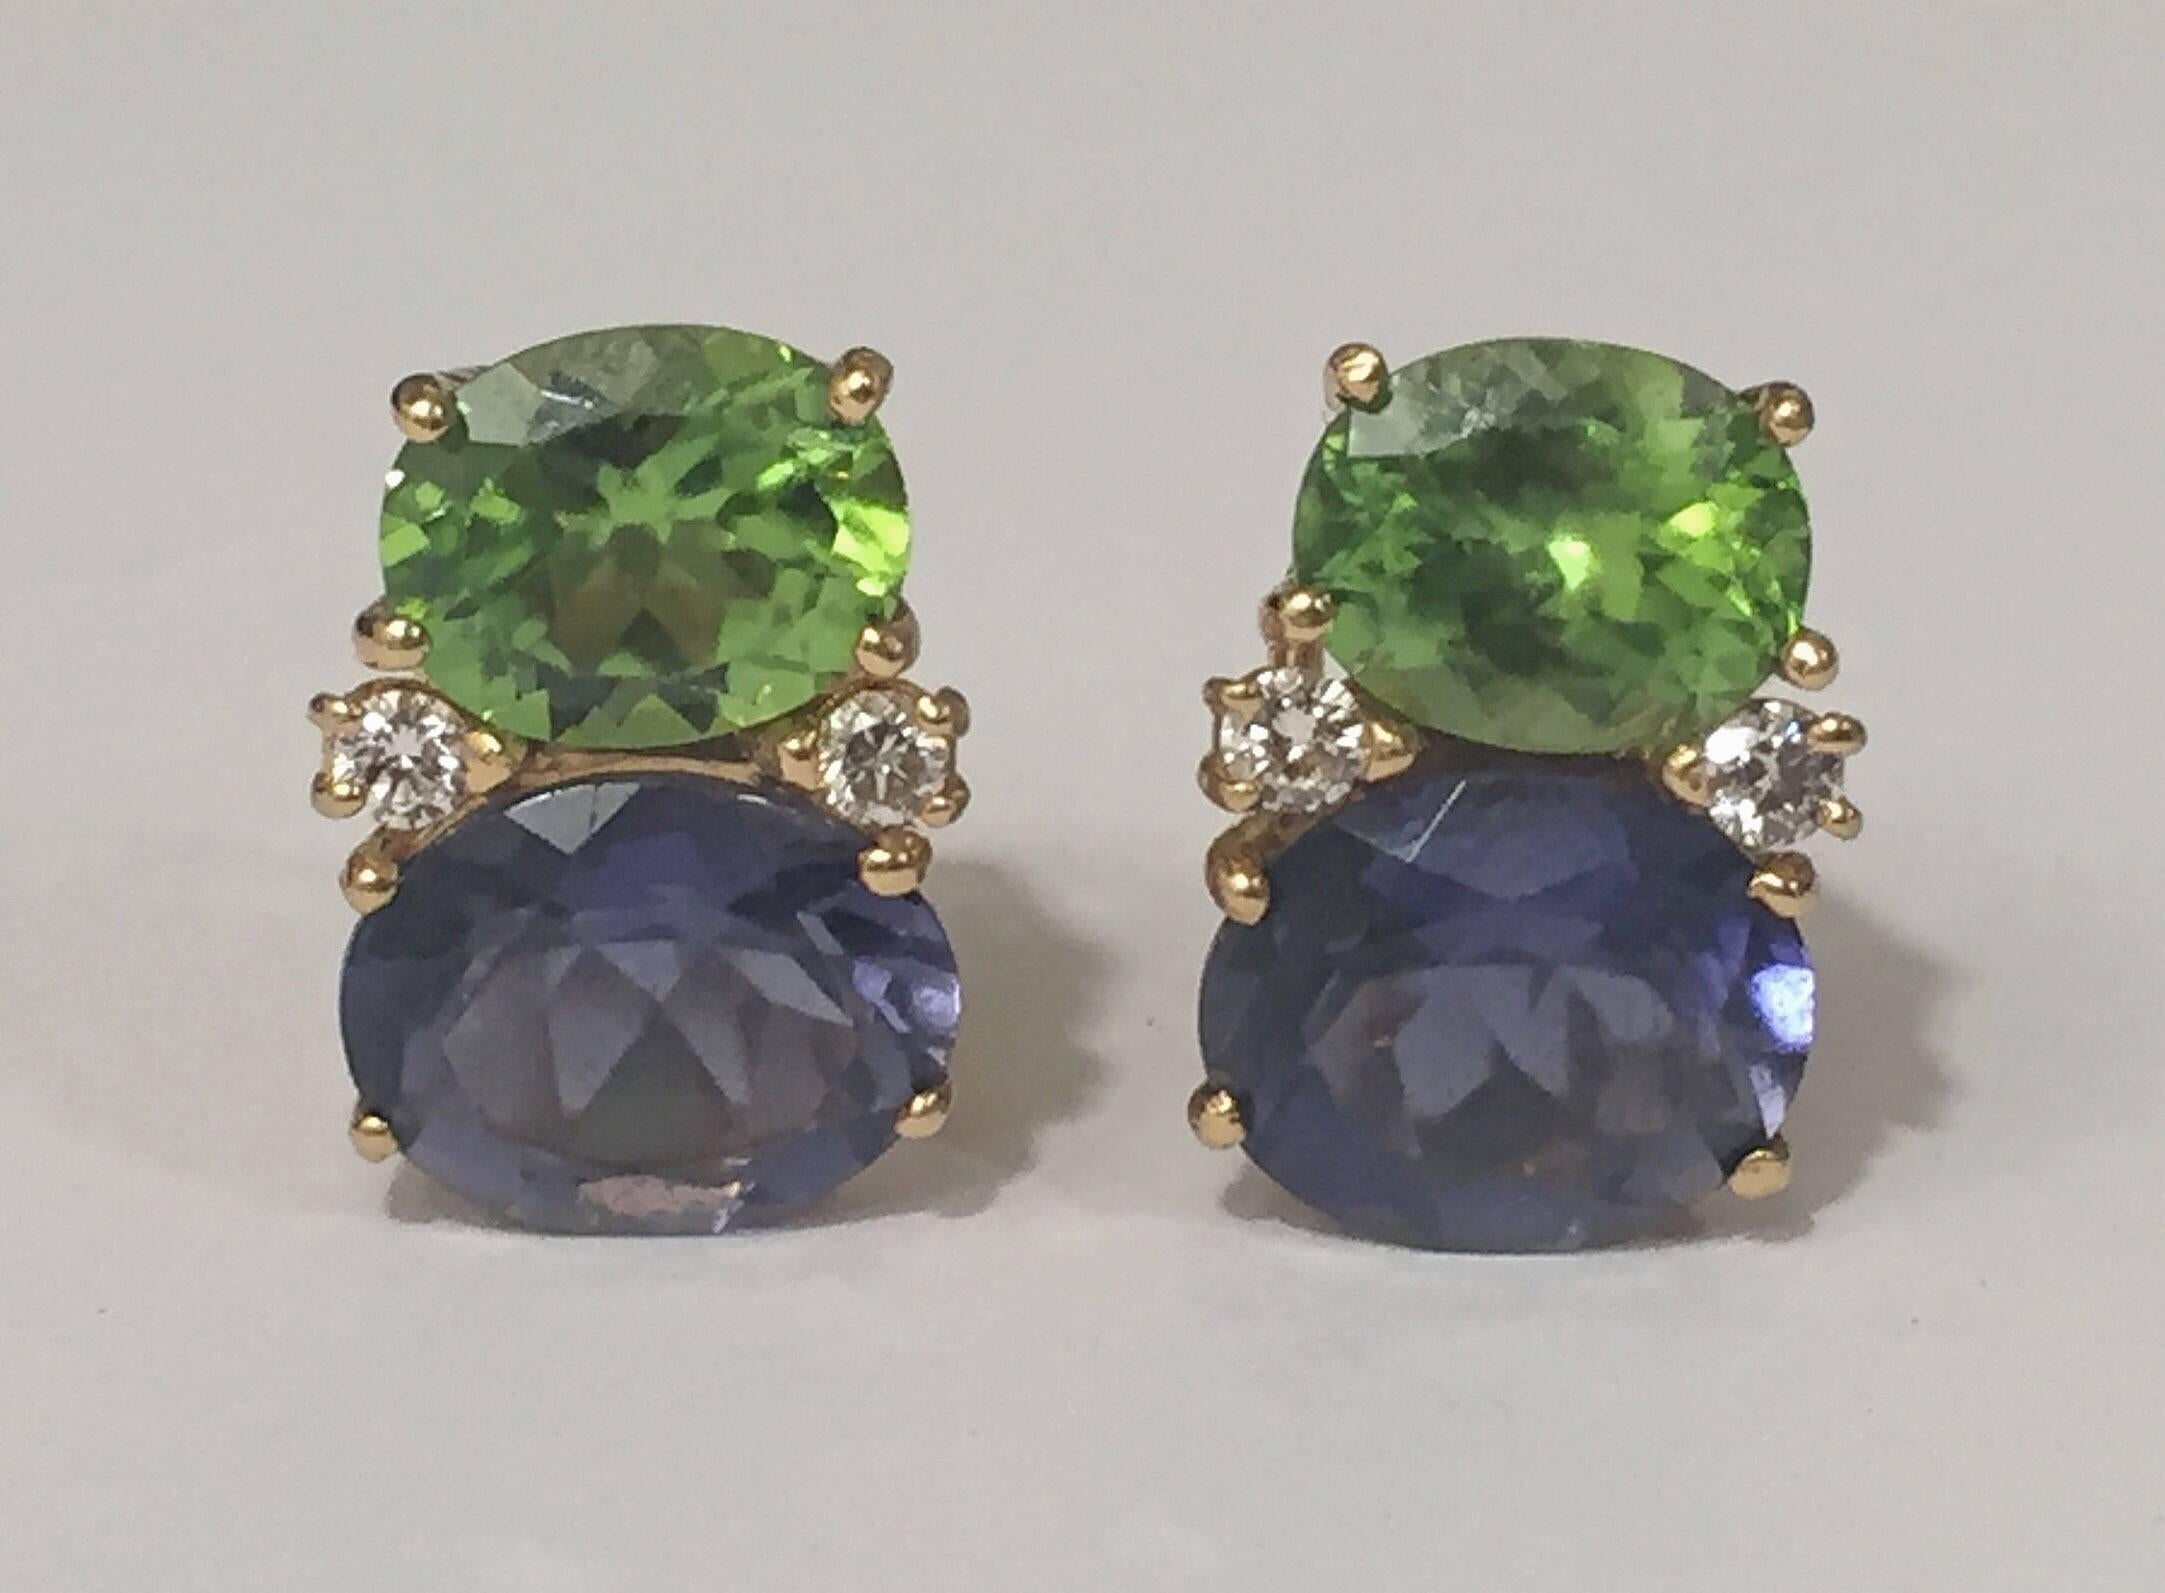 Medium 18kt yellow gold GUM DROP™ earrings with faceted Peridot (approximately 2.5 cts each), faceted Iolite (approximately 5 cts each), and 4 diamonds weighing ~0.40 cts. 

Specifications: Height: 3/4